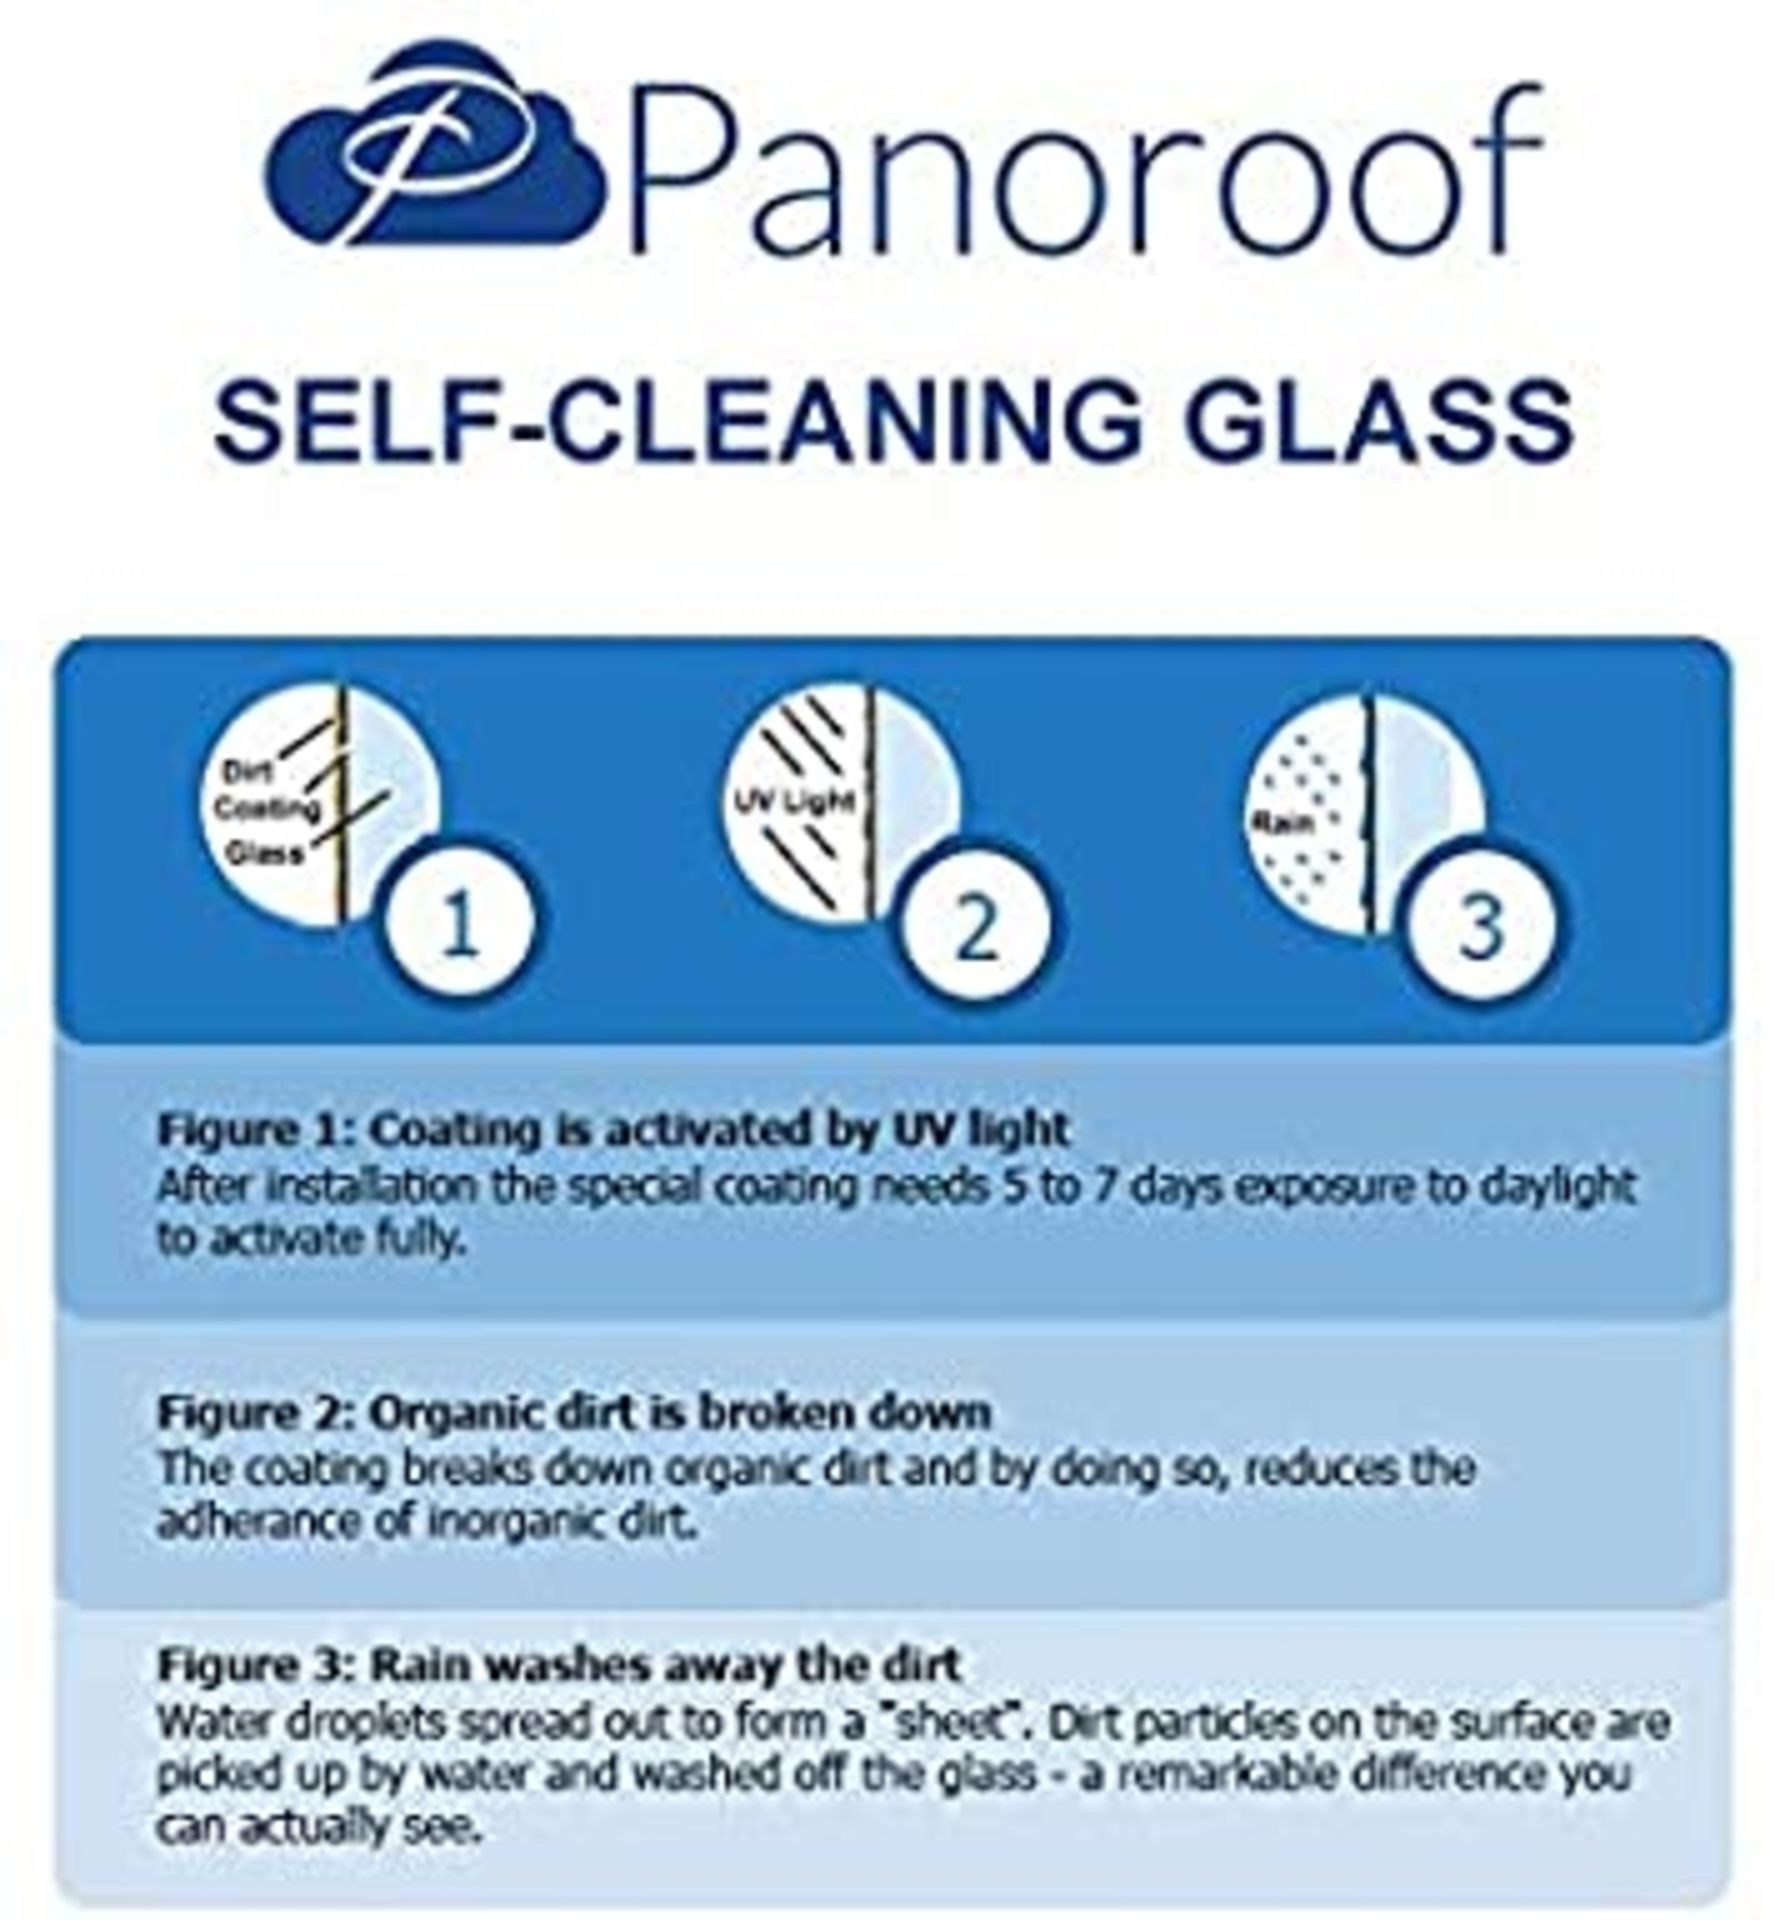 """Panoroof Triple Glazed Self Cleaning 500x1200mm (inside Size Visable glass area) Seamless Glass - Image 6 of 6